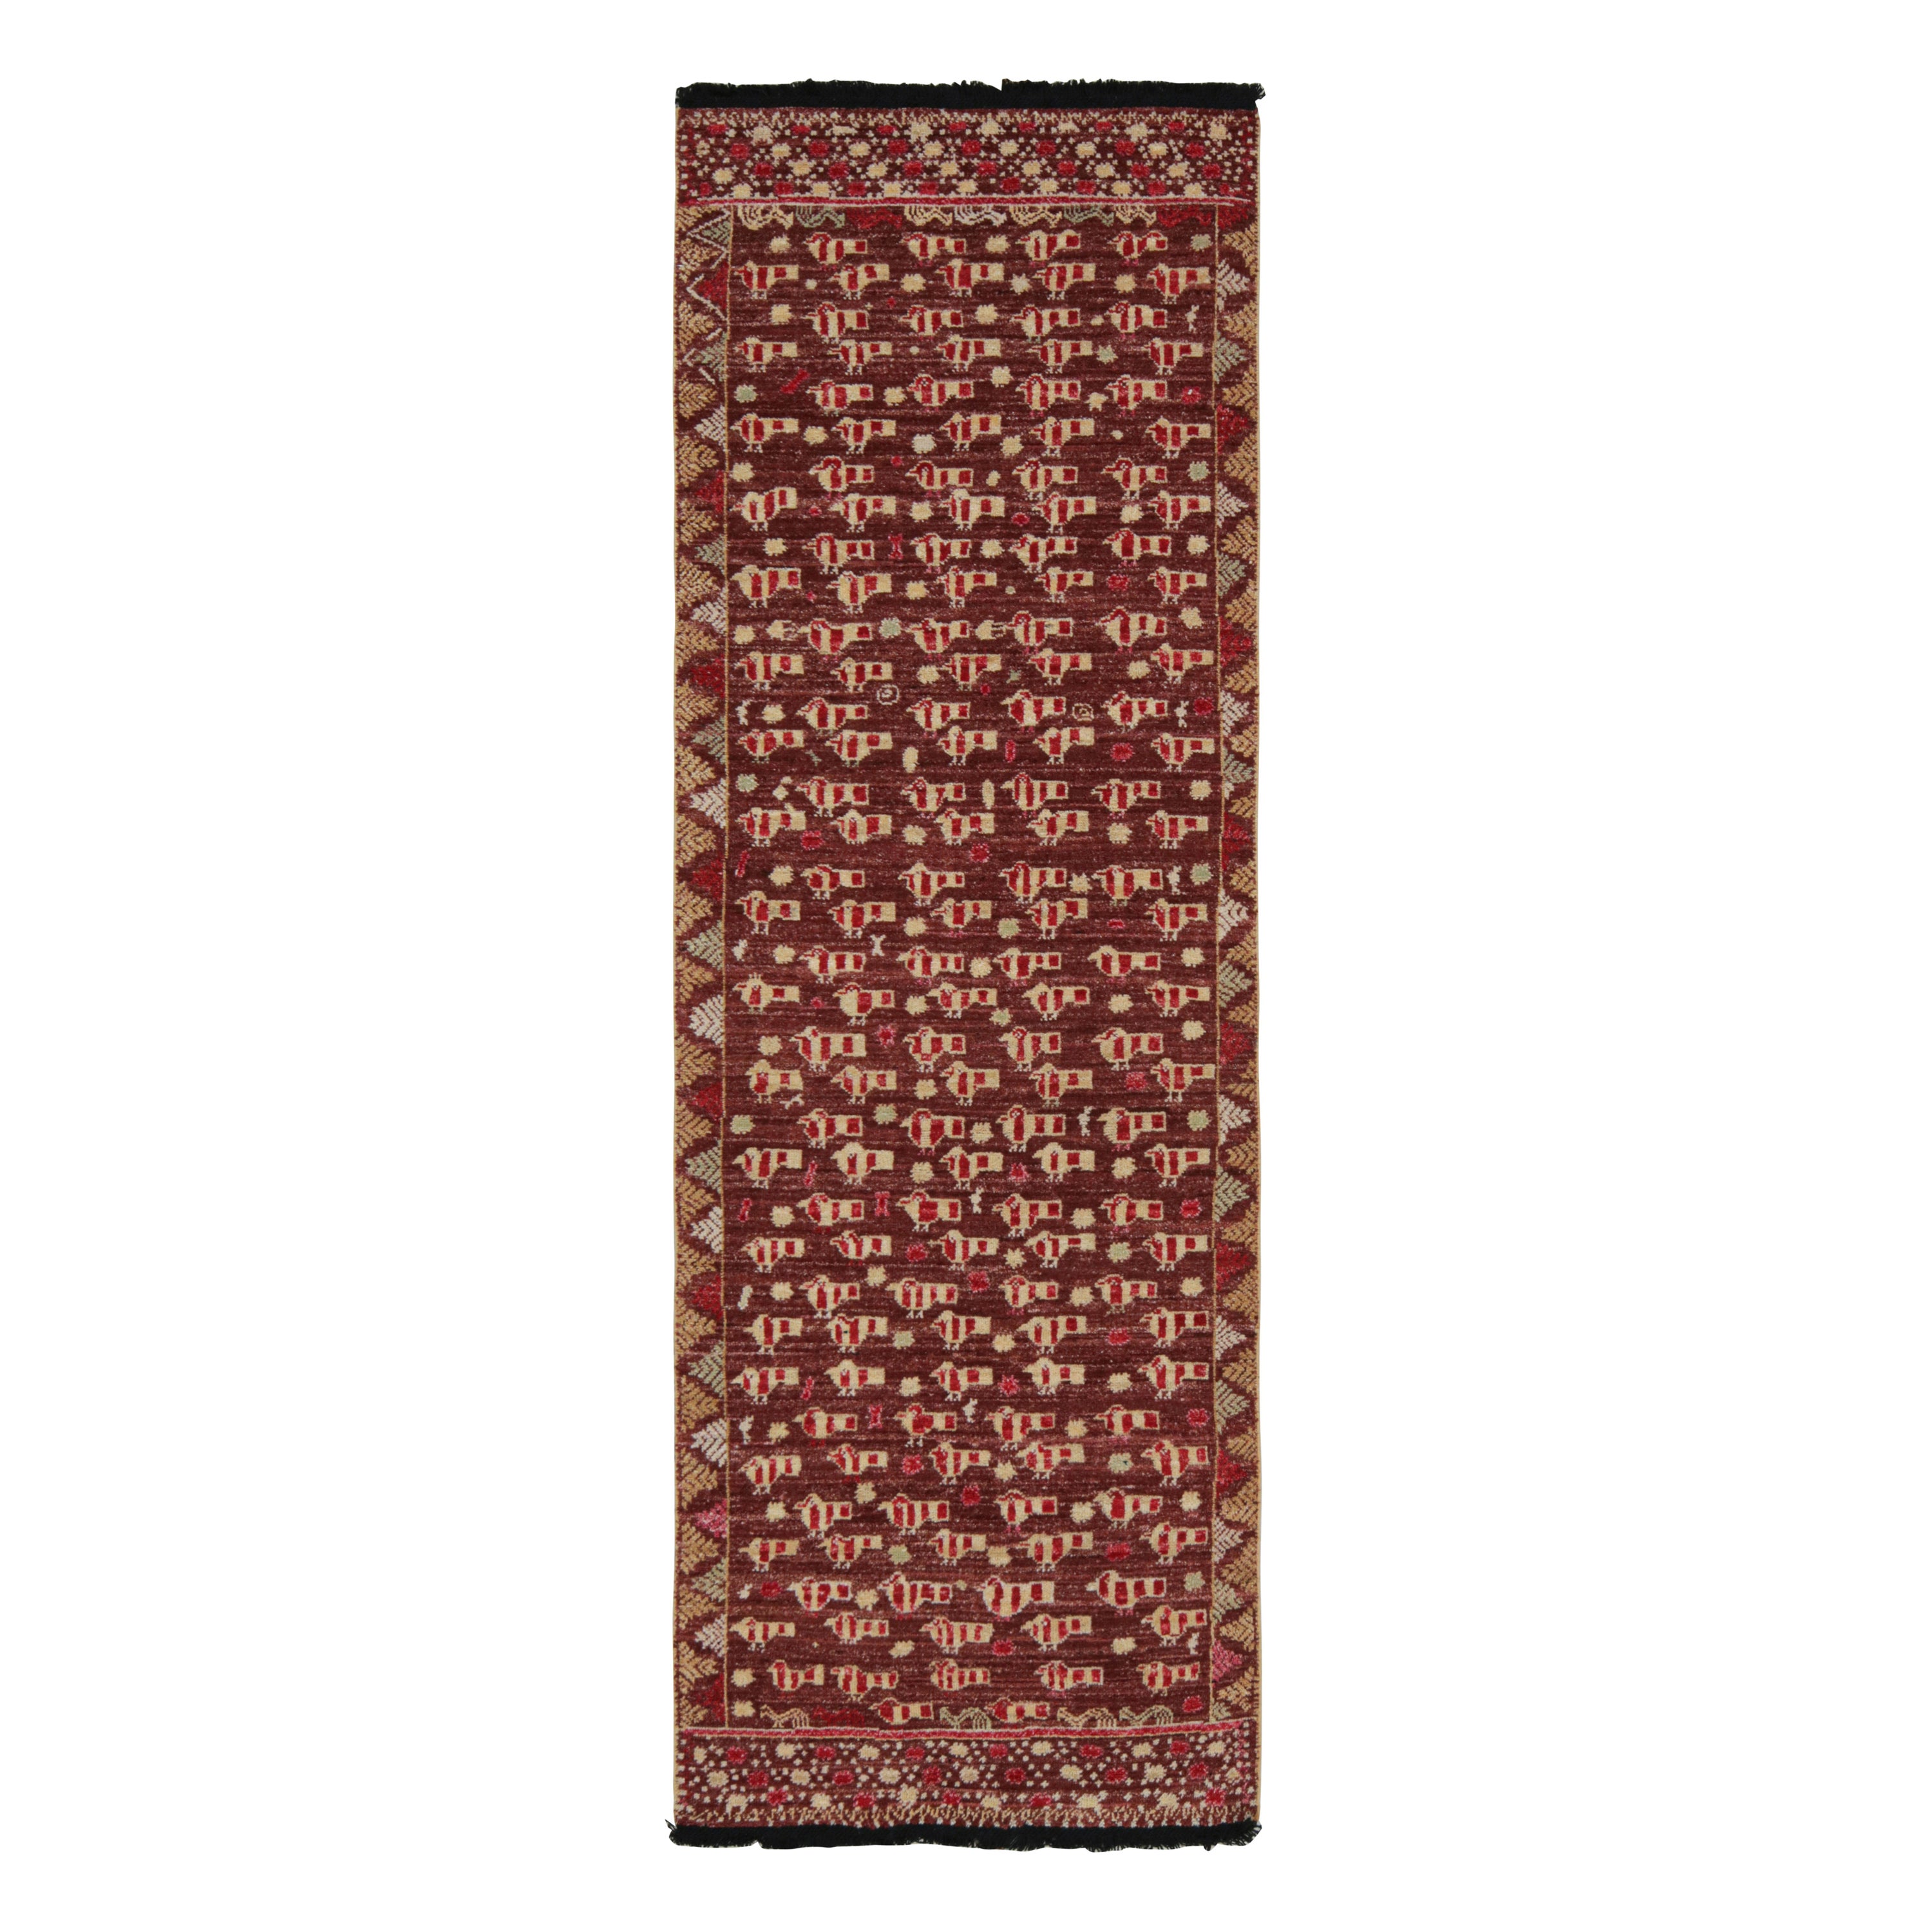 Rug & Kilim’s Moroccan Style Runner Rug in Orange with Geometric Patterns